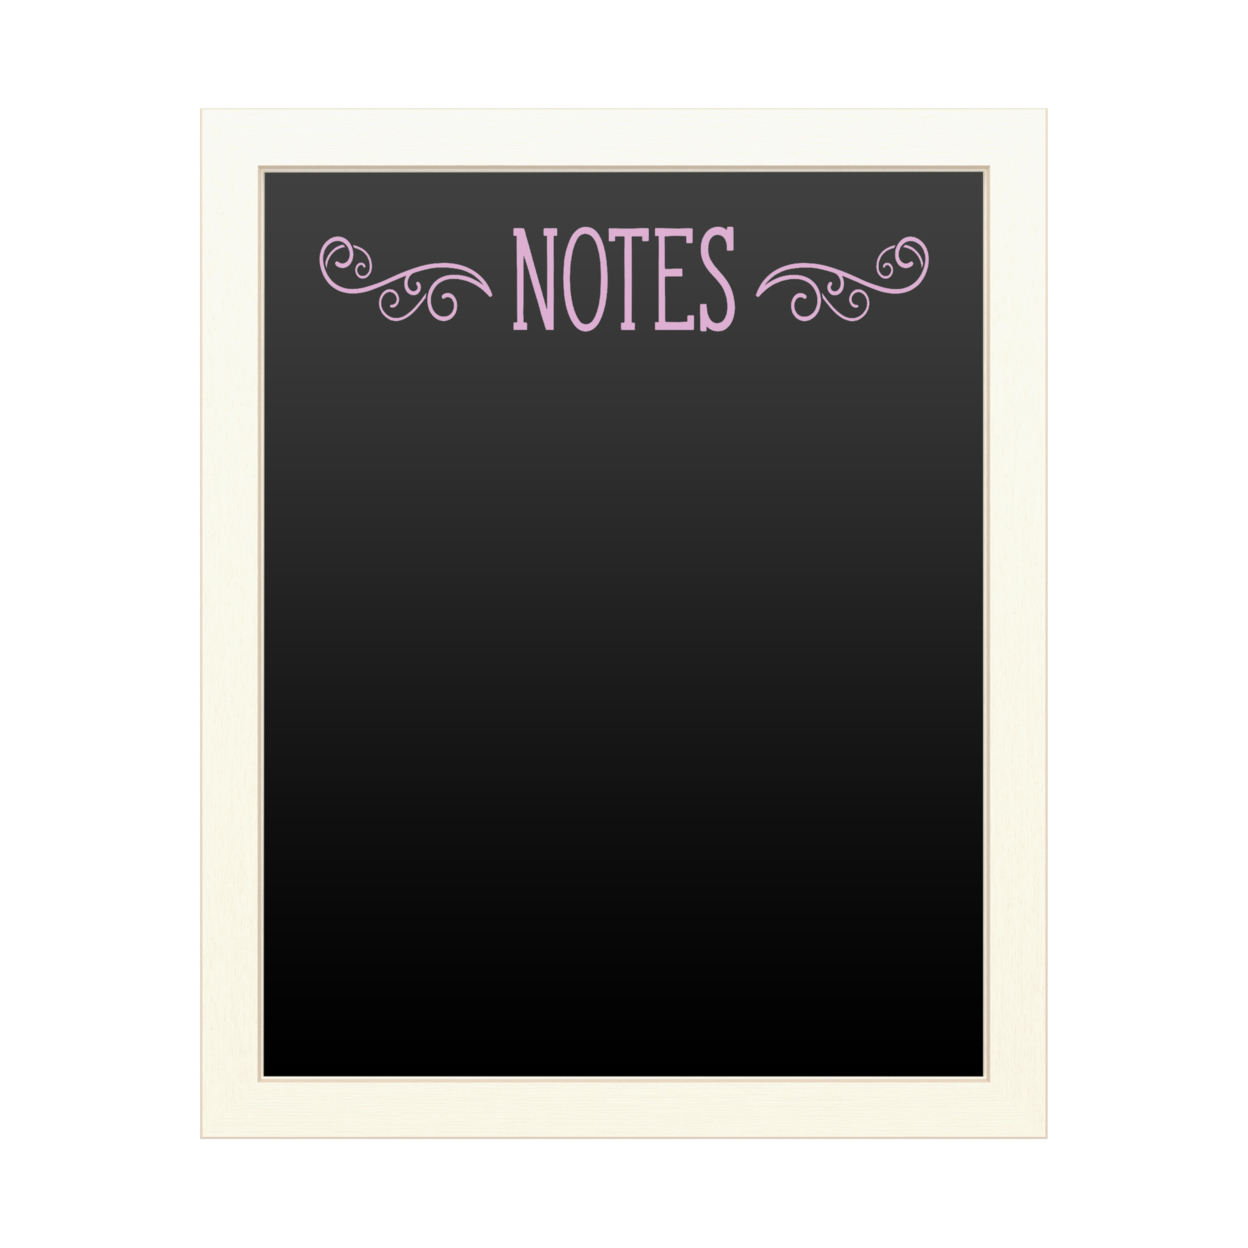 16 X 20 Chalk Board With Printed Artwork - Notes Serrif 2 White Board - Ready To Hang Chalkboard